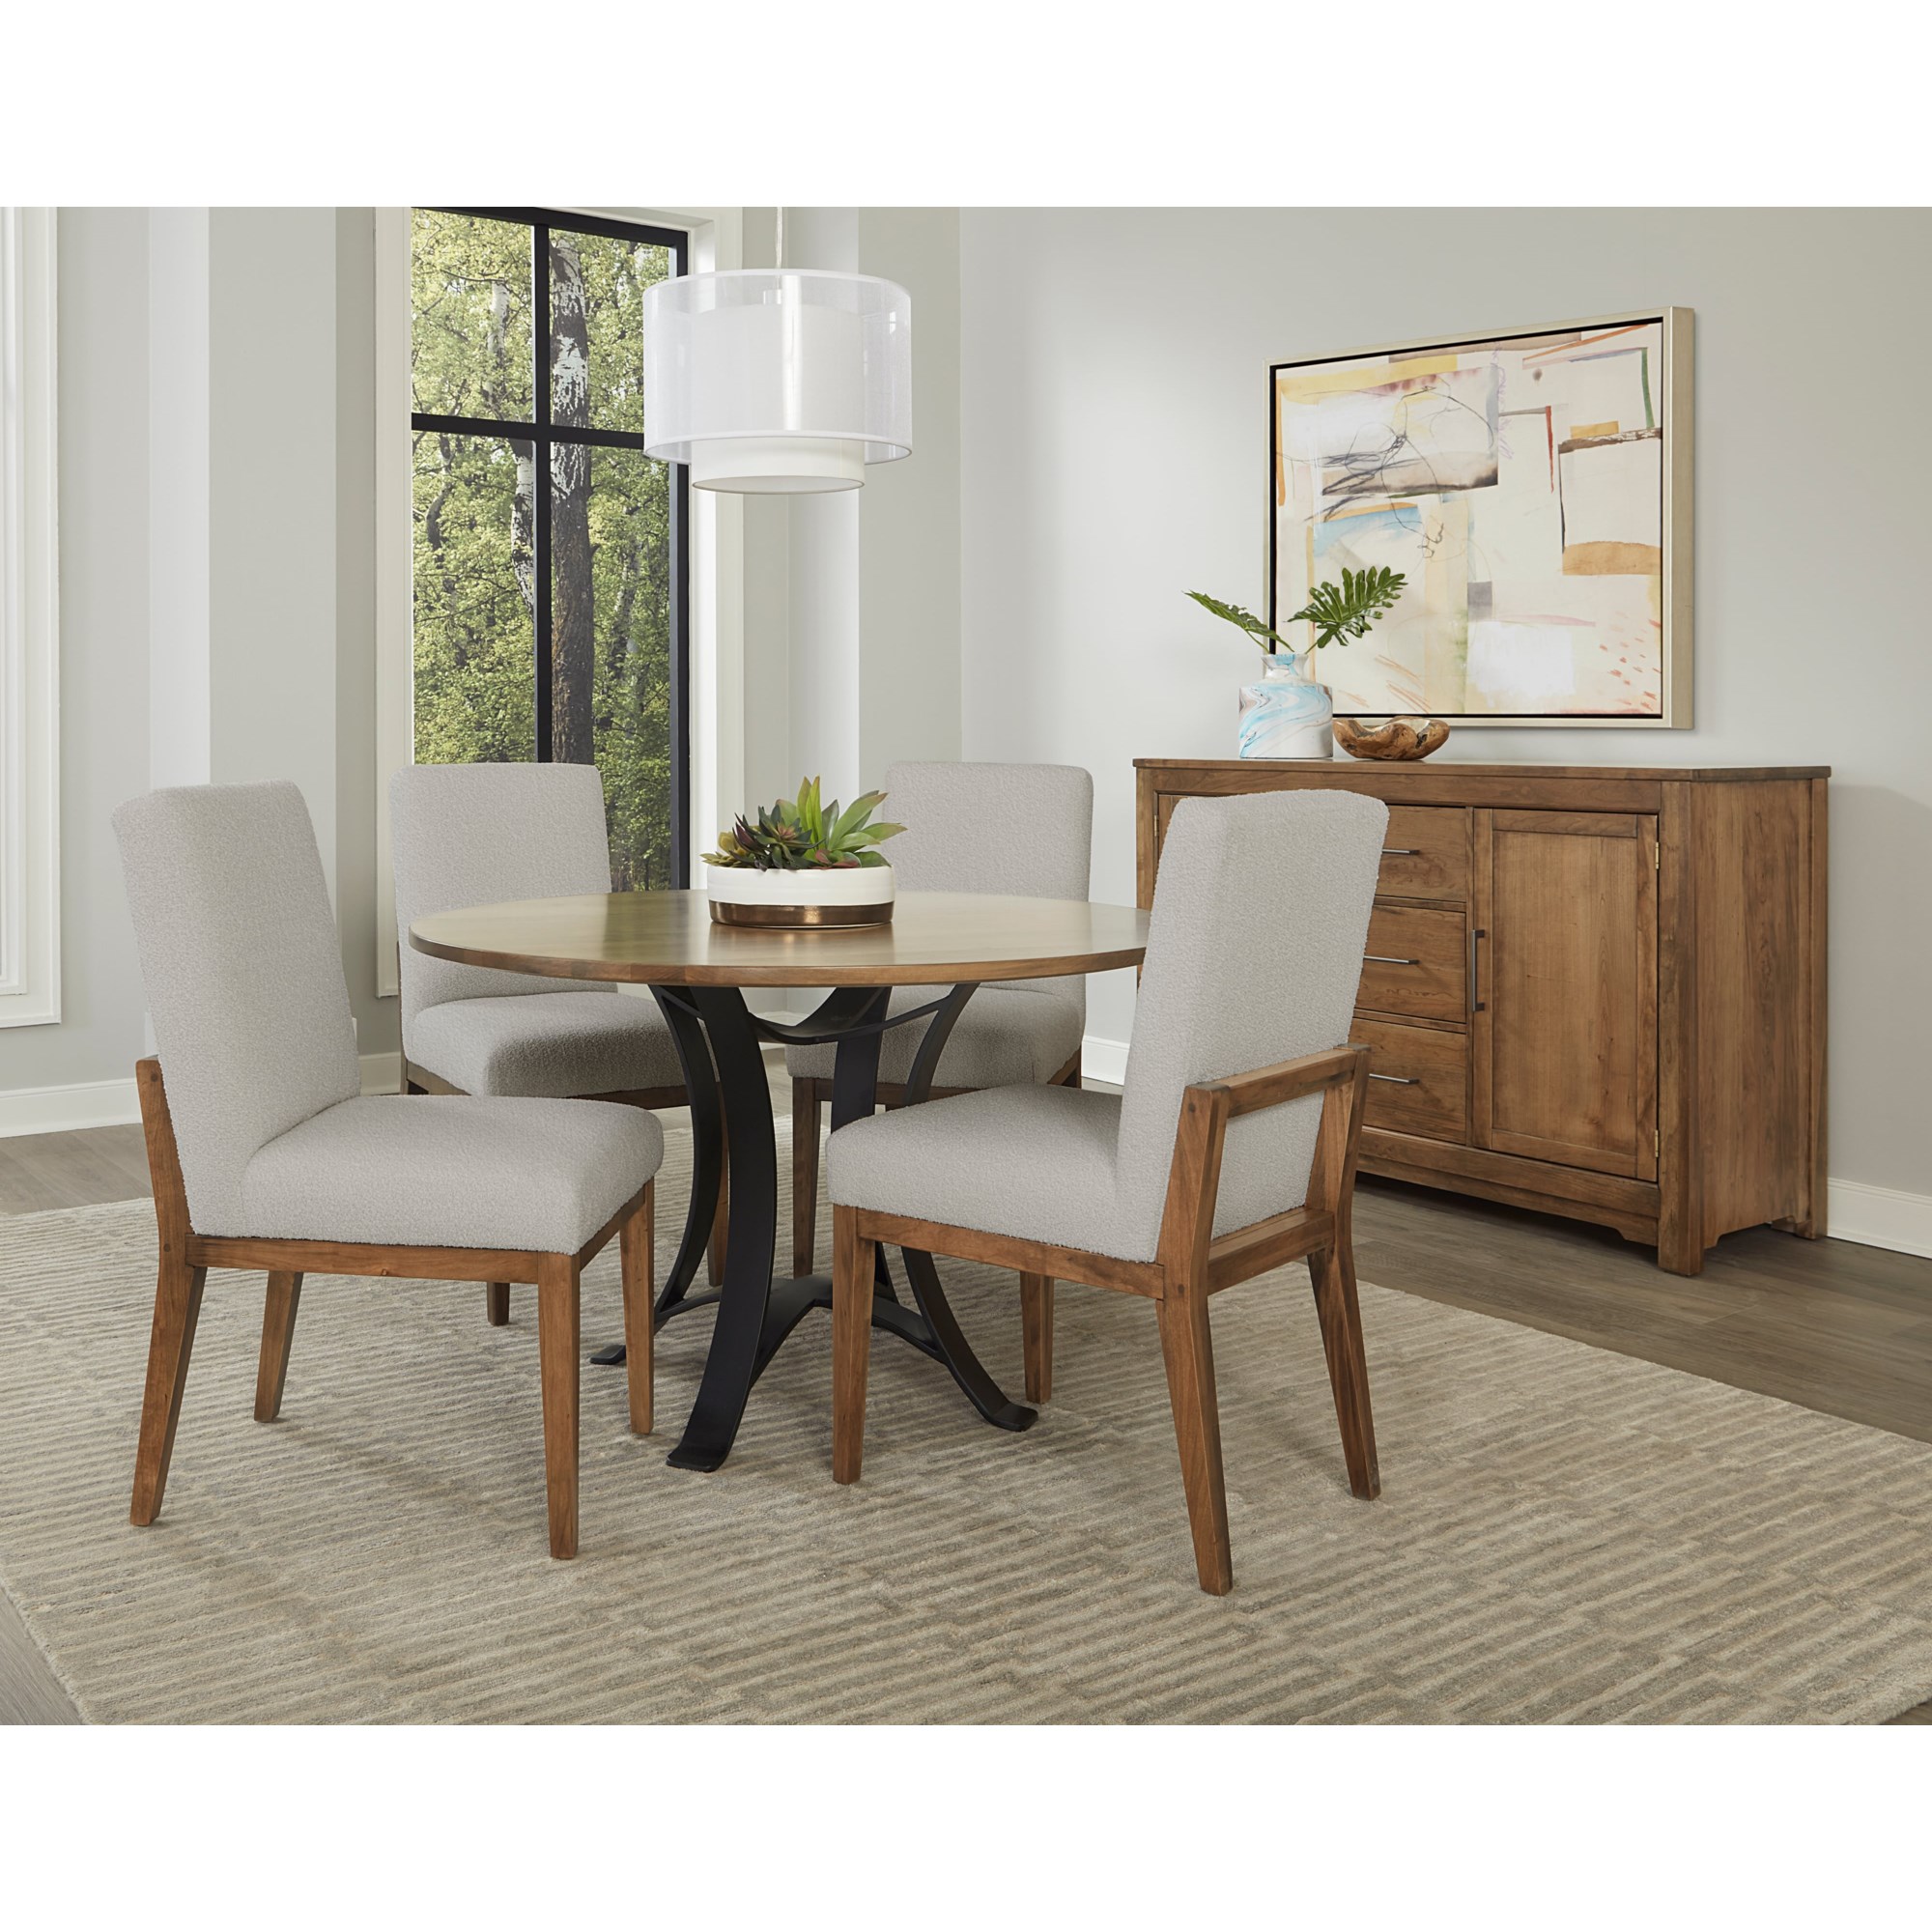 Vaughan Bassett Crafted Cherry - Medium 151-030B Contemporary Upholstered  Side Dining Chair | Brown Squirrel Furniture | Chair - Dining Side Chairs